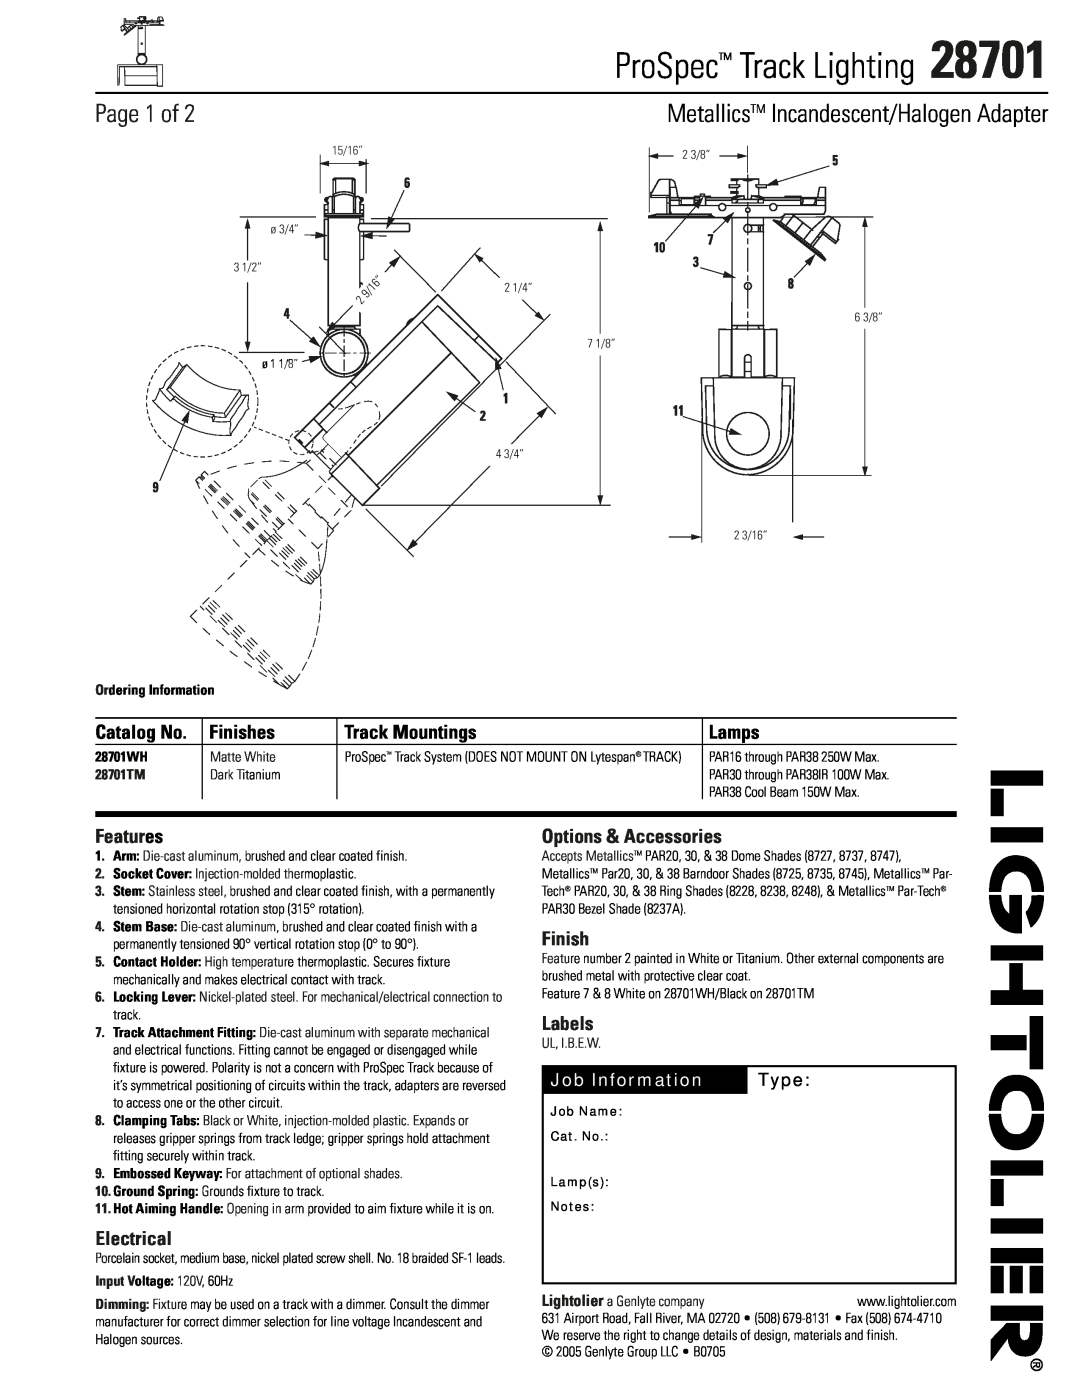 Lightolier 28701 manual Page 1 of, Features, Electrical, Options & Accessories, Finish, Labels, Job Information, Type 